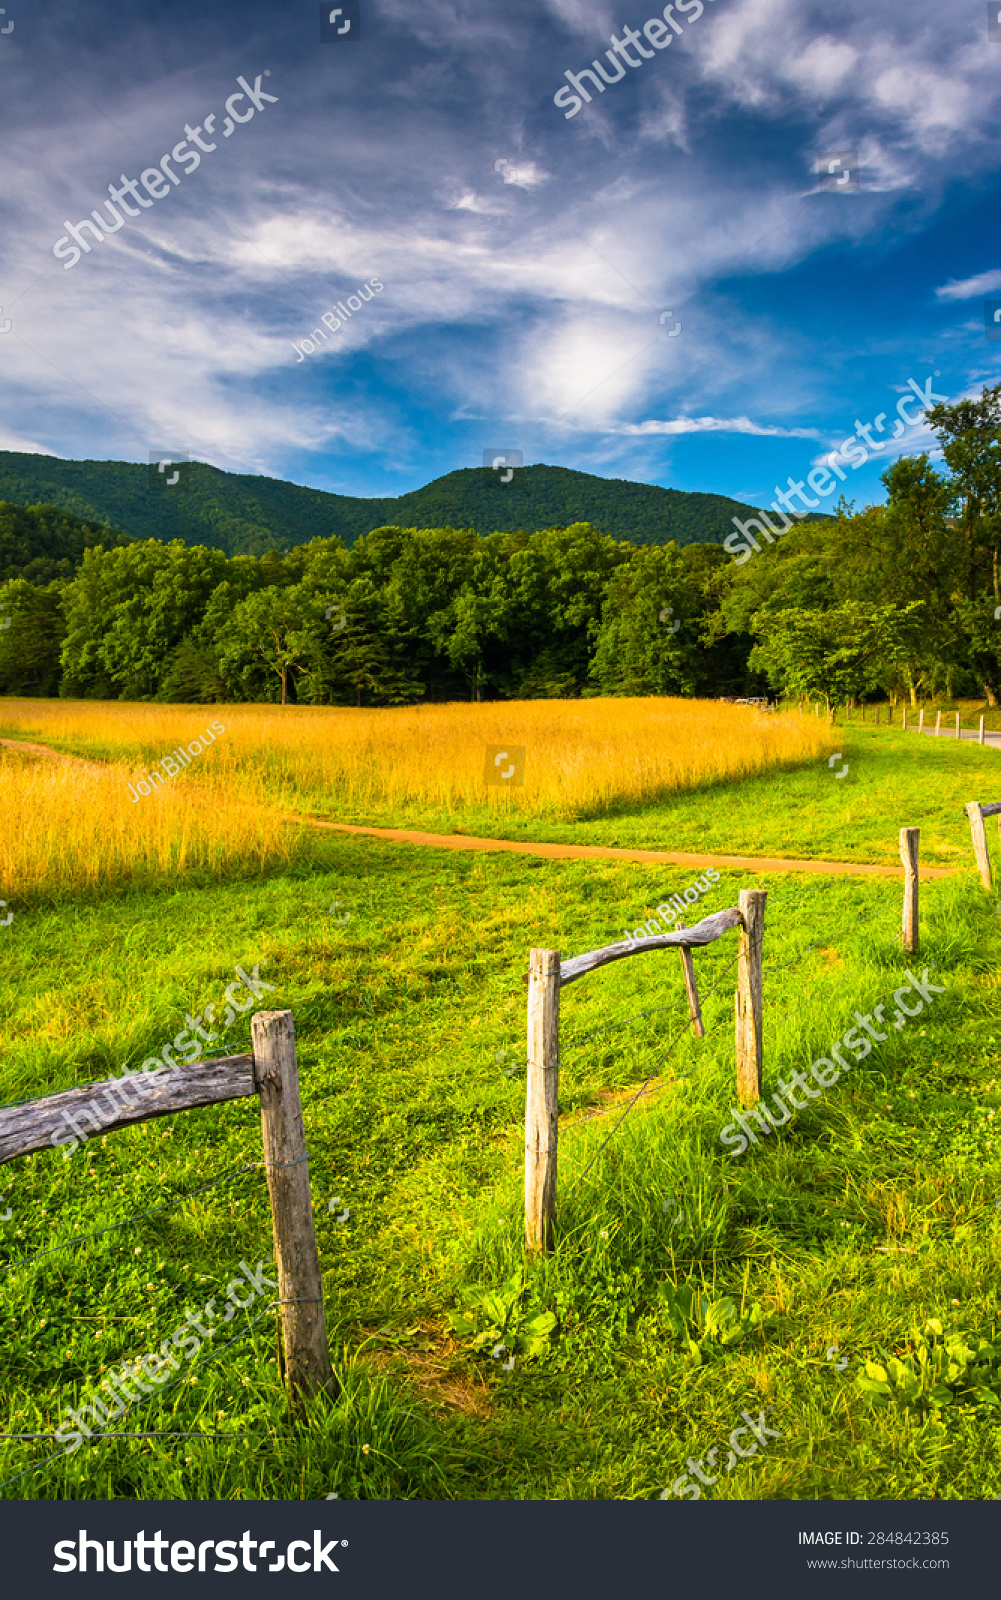 Fence and field at  Cade's Cove, Great Smoky Mountains National Park, Tennessee. #284842385